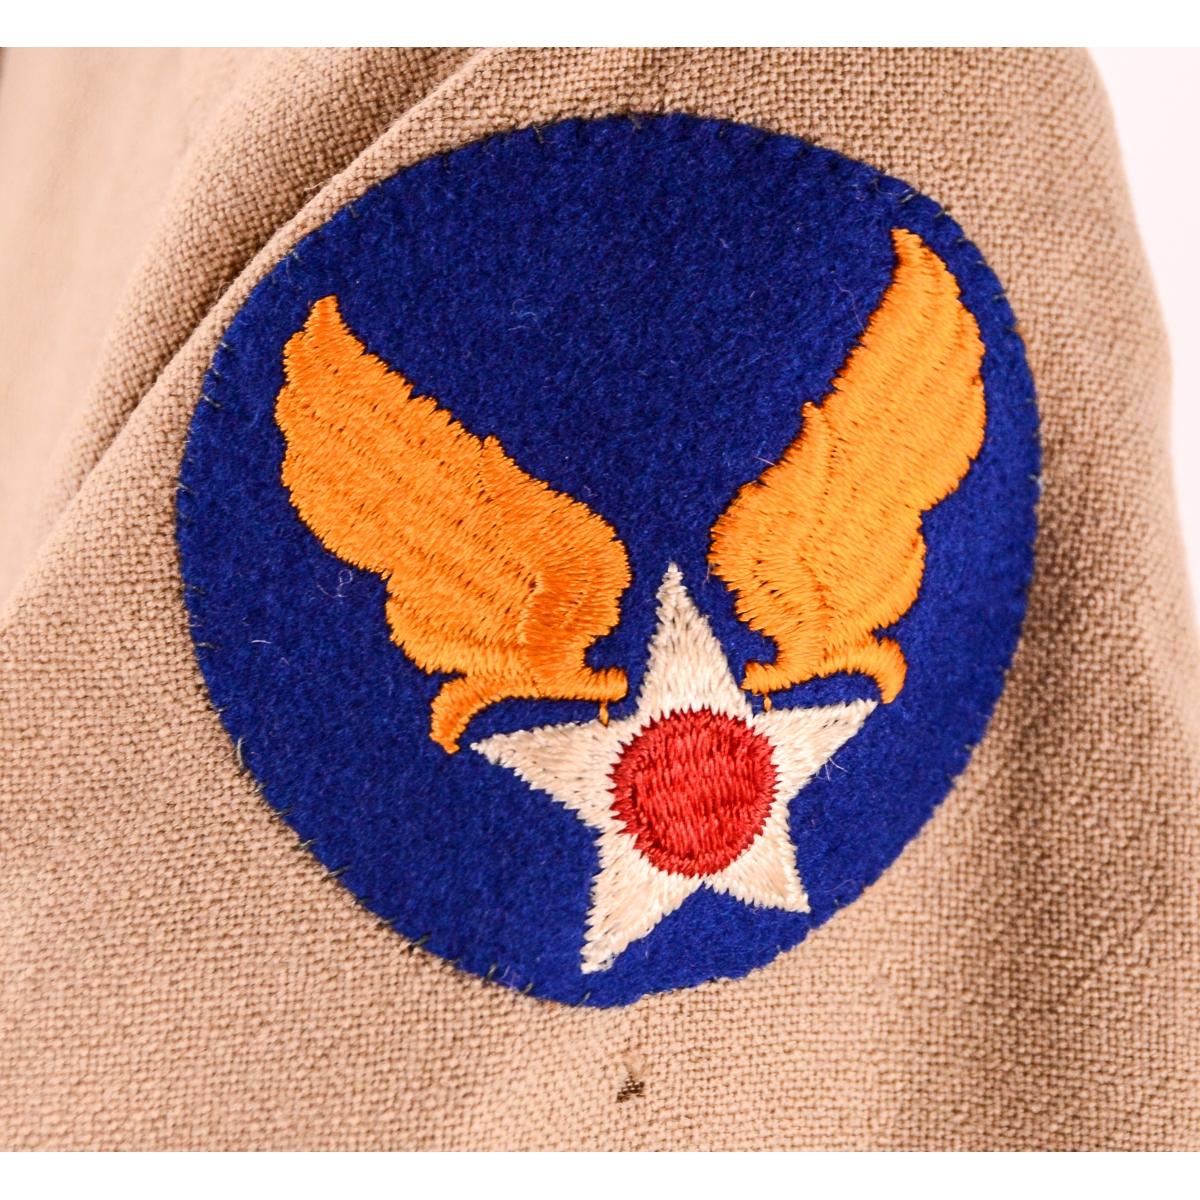 WWII USAAF Officers 4 Pocket Tunic w Patches 2Pcs